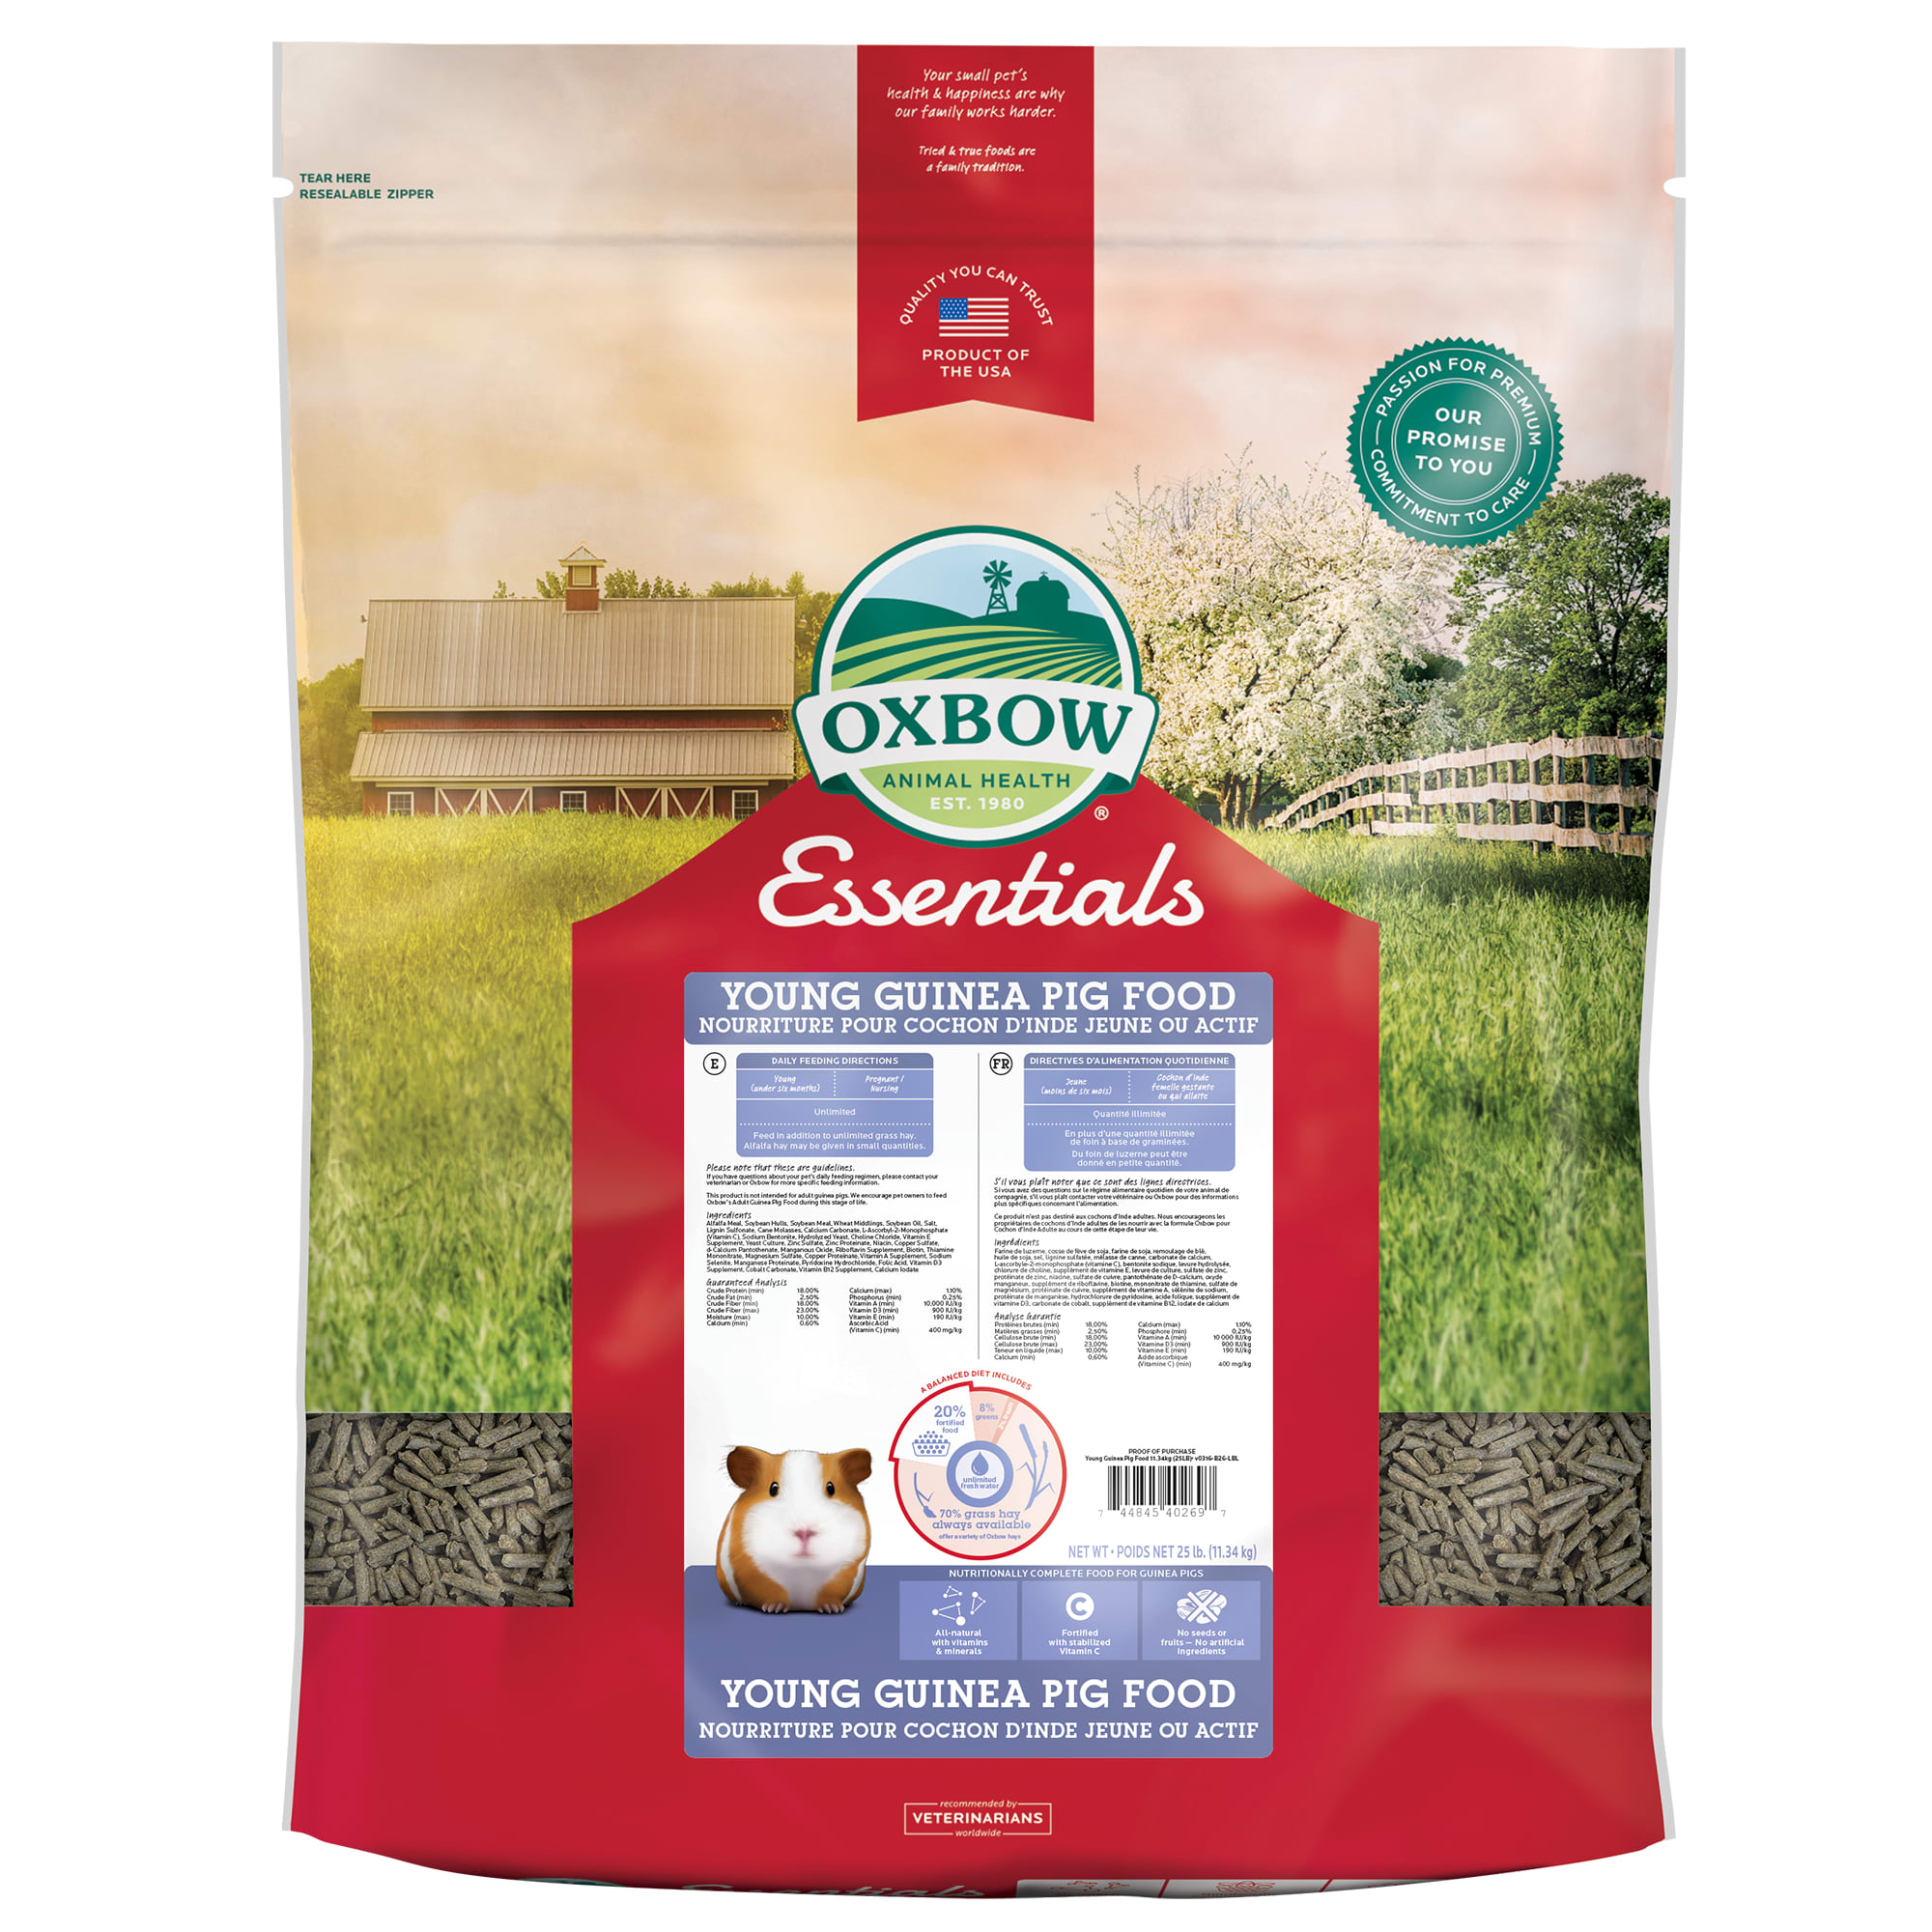 Oxbow Essentials Young Guinea Pig Food, 25 lbs. | Petco